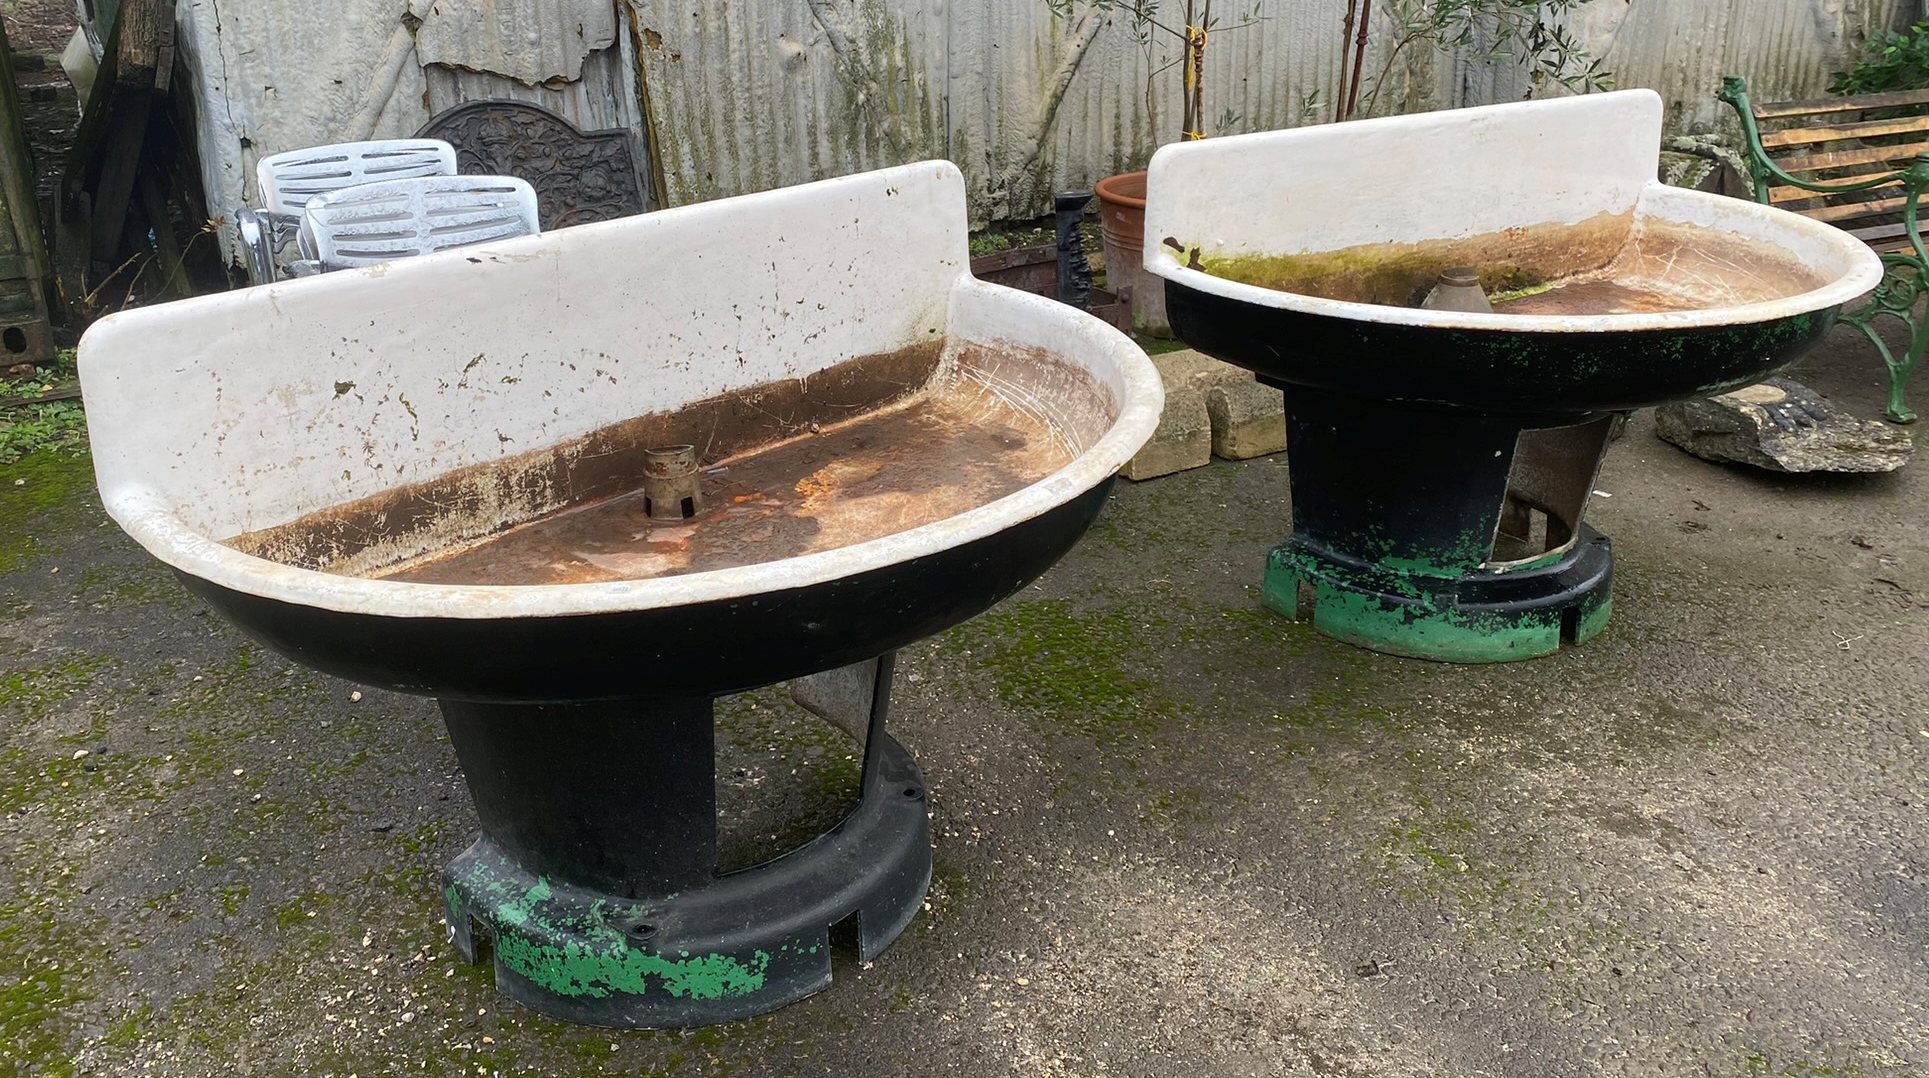 Quite remarkable pair of large enamelled feeders or troughs or sinks, d-end form on tapered bases,